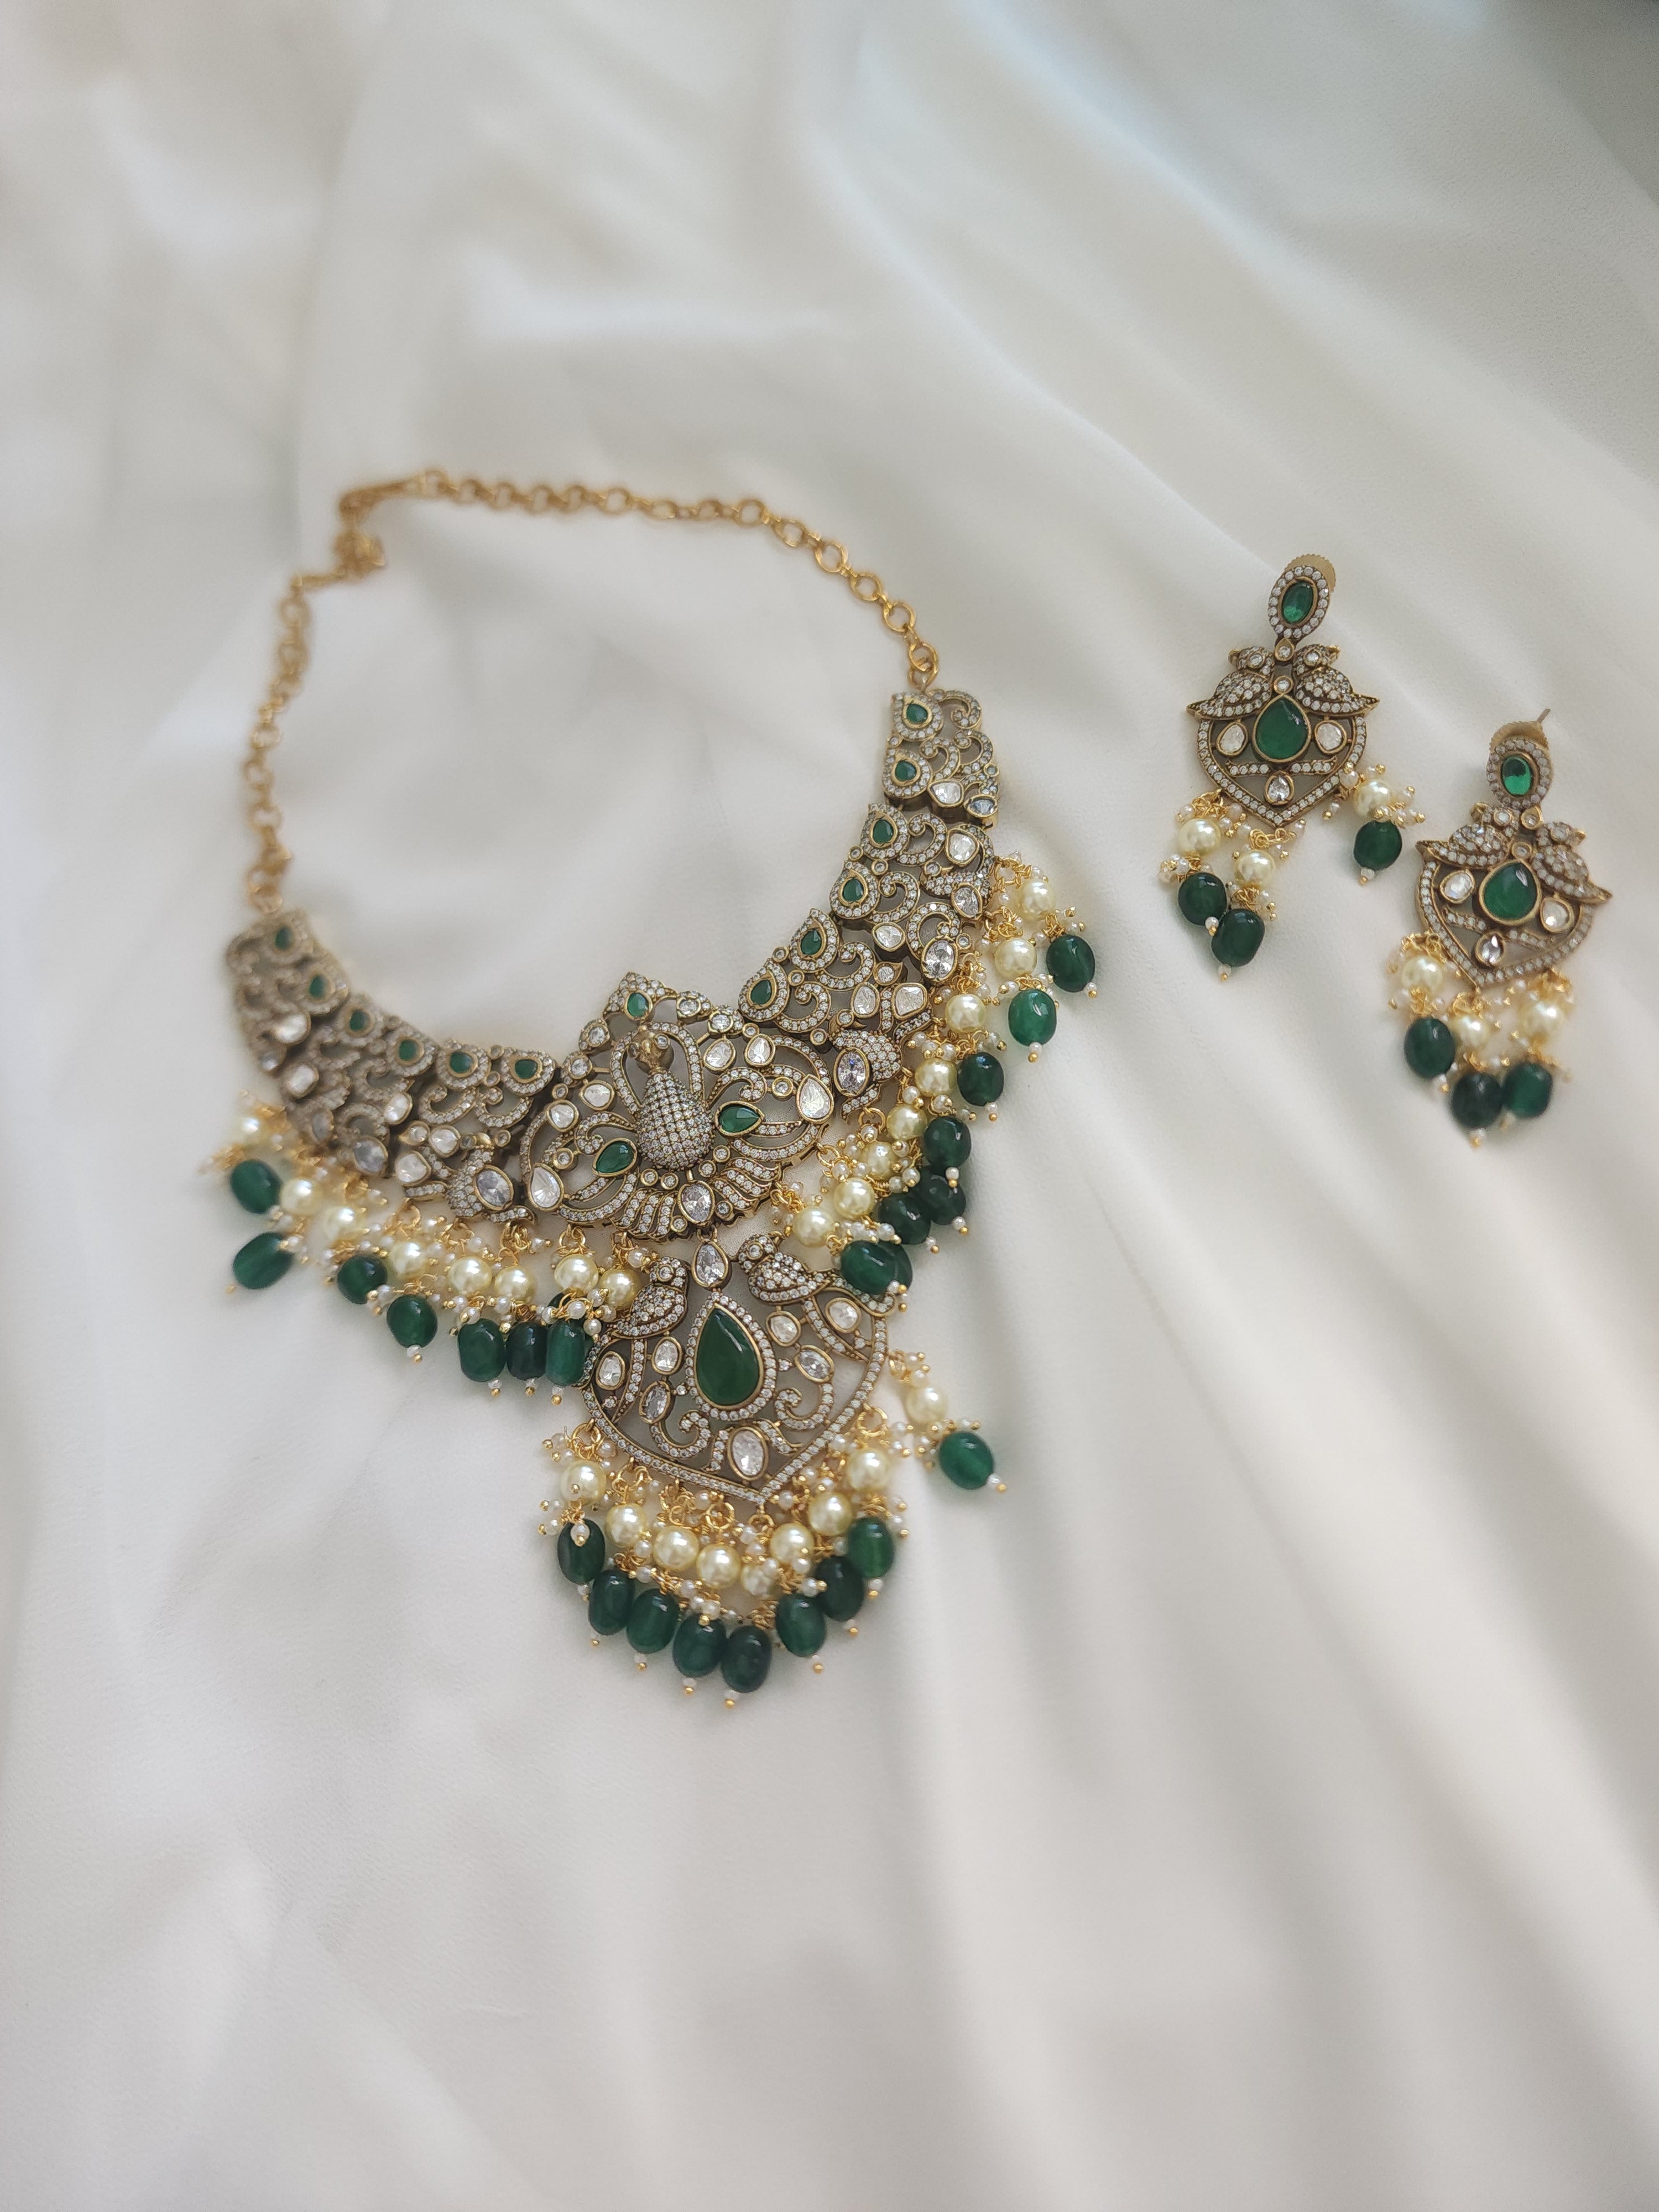 Victorian polki peacock necklace with earrings